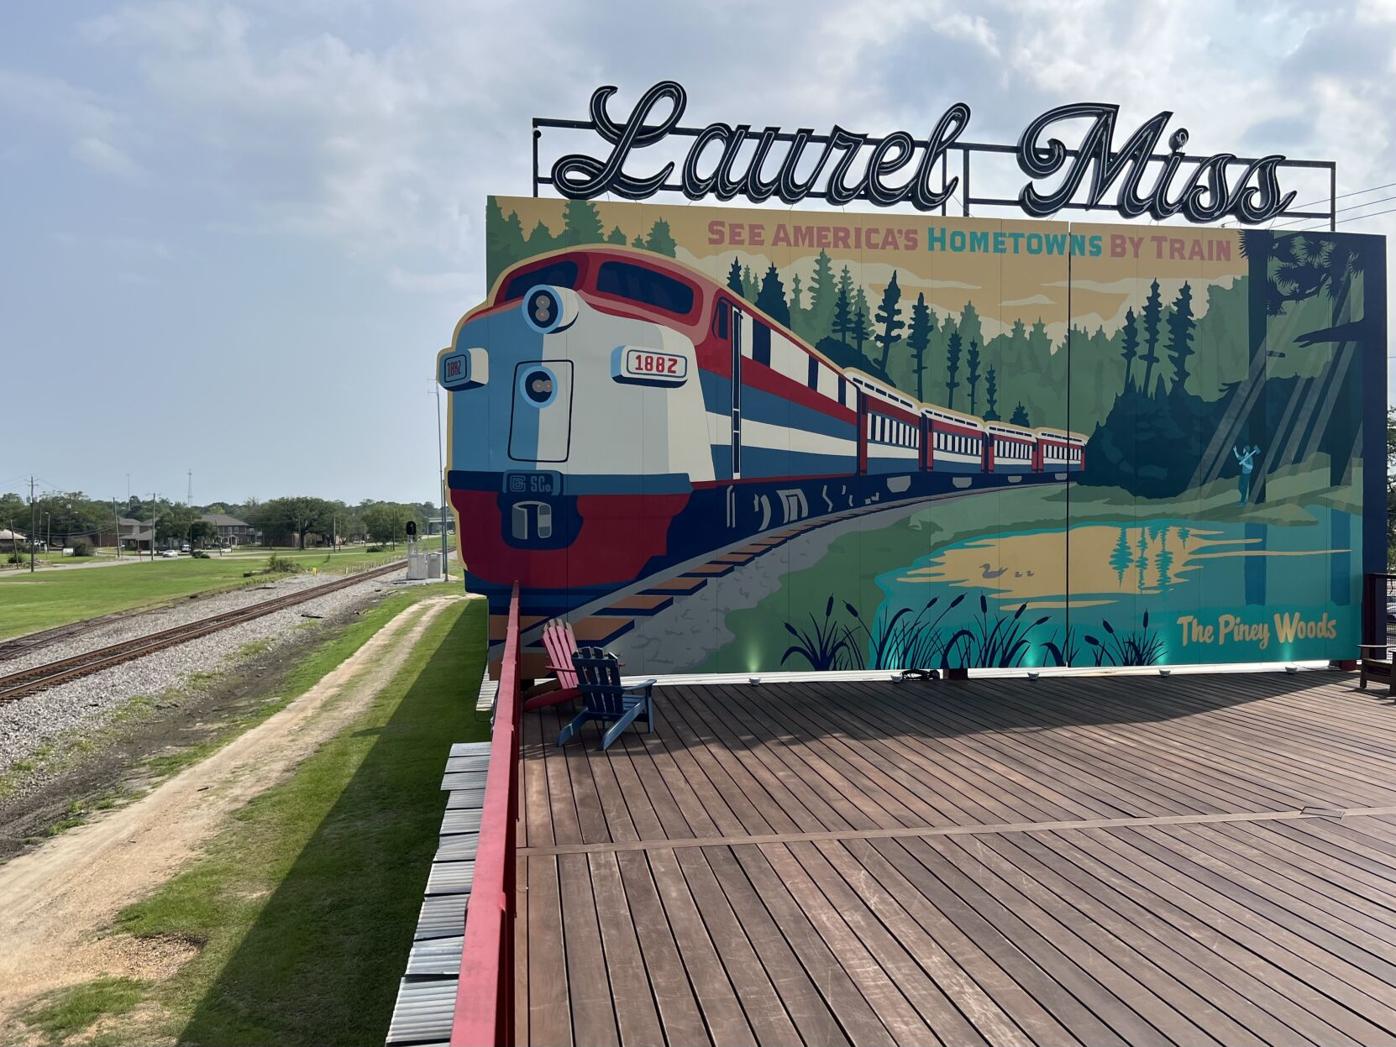 Laurel, Miss. pulls in tourists thanks to HGTV's 'Hometown', Entertainment/Life